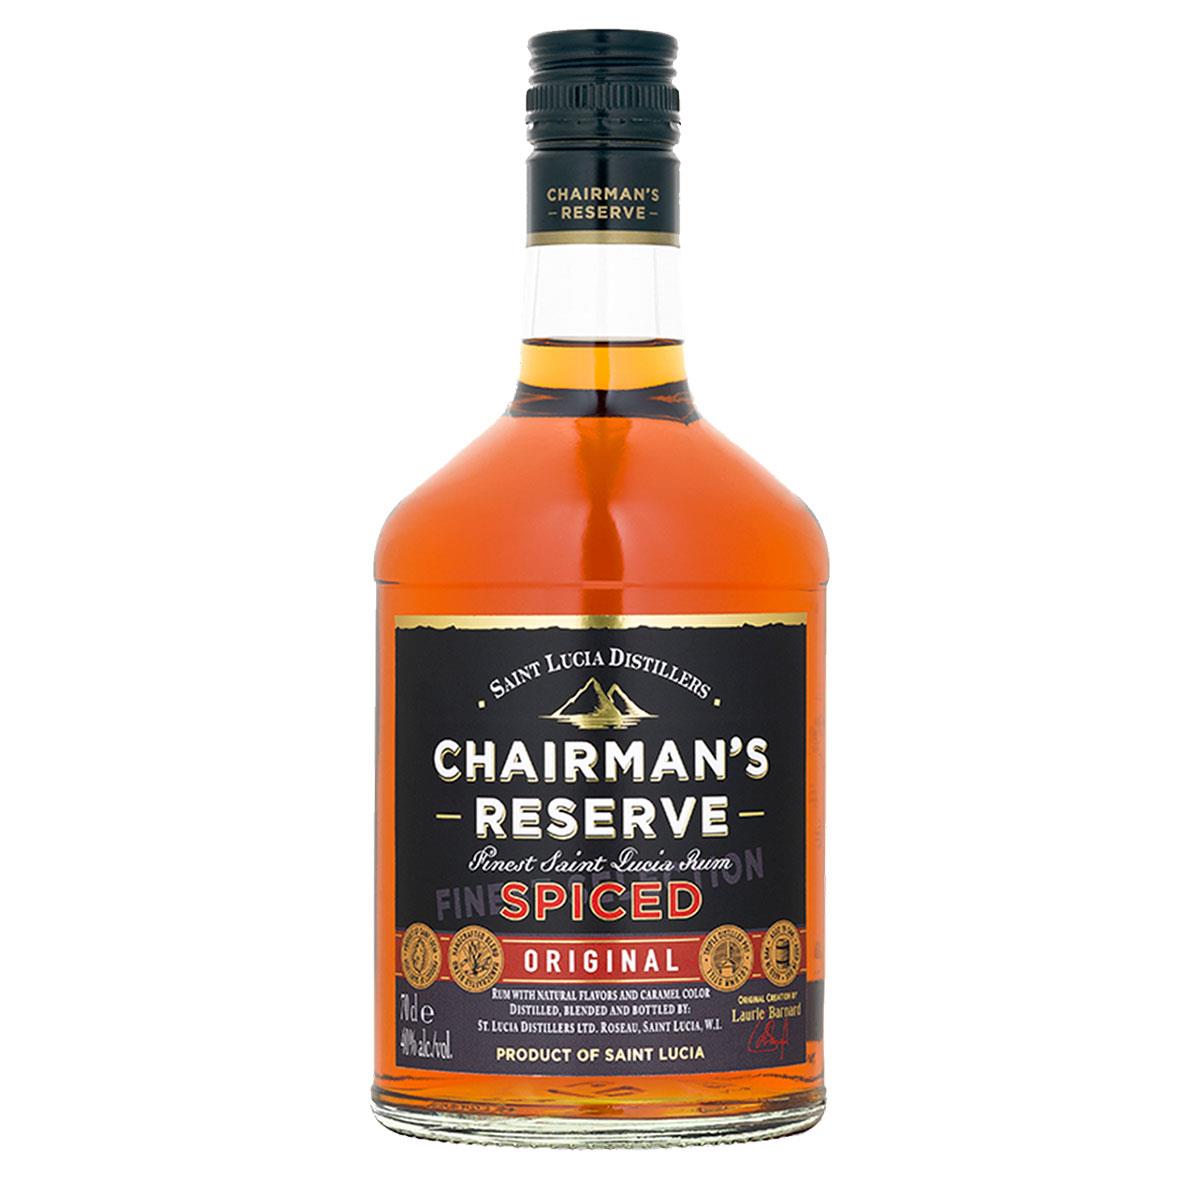 Chairmans Reserve Spiced Rum 700ml